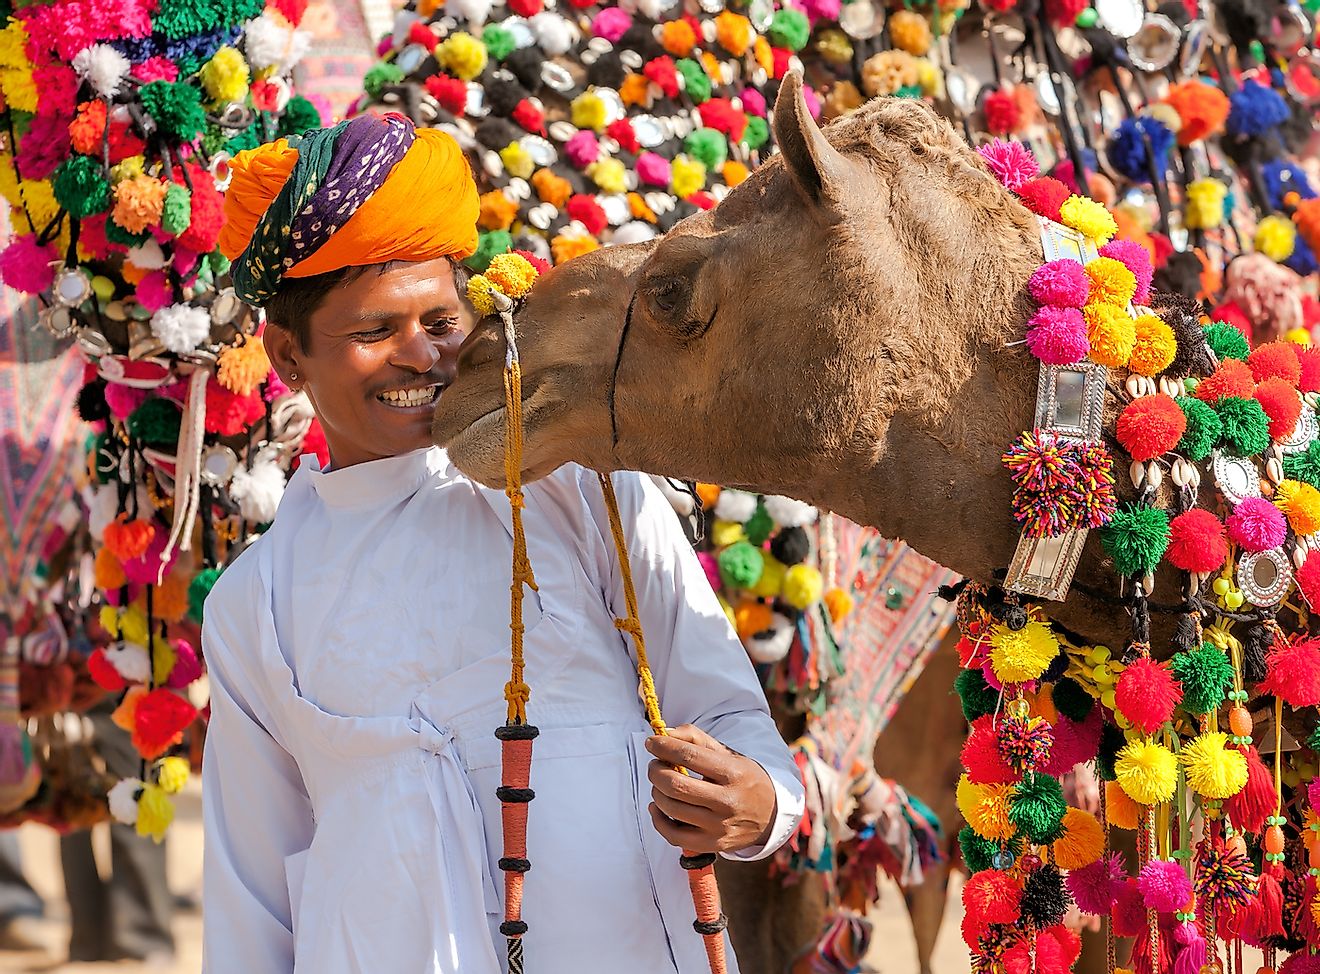 Camel and his owner at traditional camel decoration competition at camel mela in Pushkar, Rajasthan, India. Image credit: photoff/Shutterstock.com